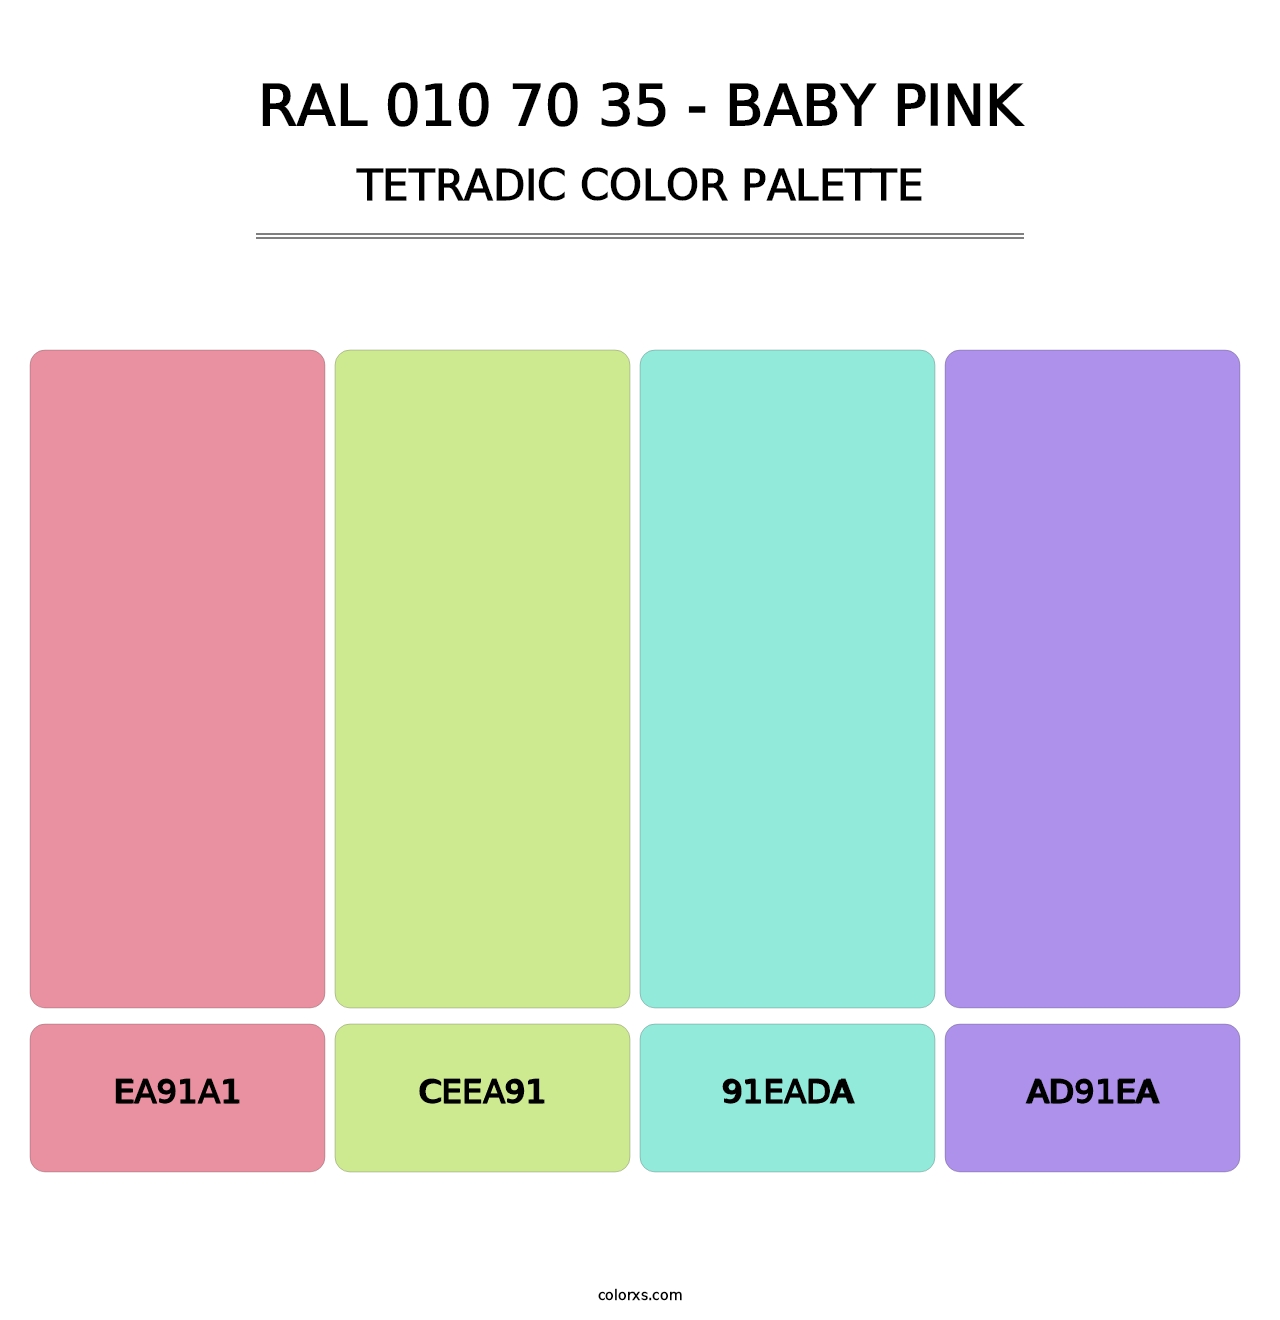 RAL 010 70 35 - Baby Pink - Tetradic Color Palette